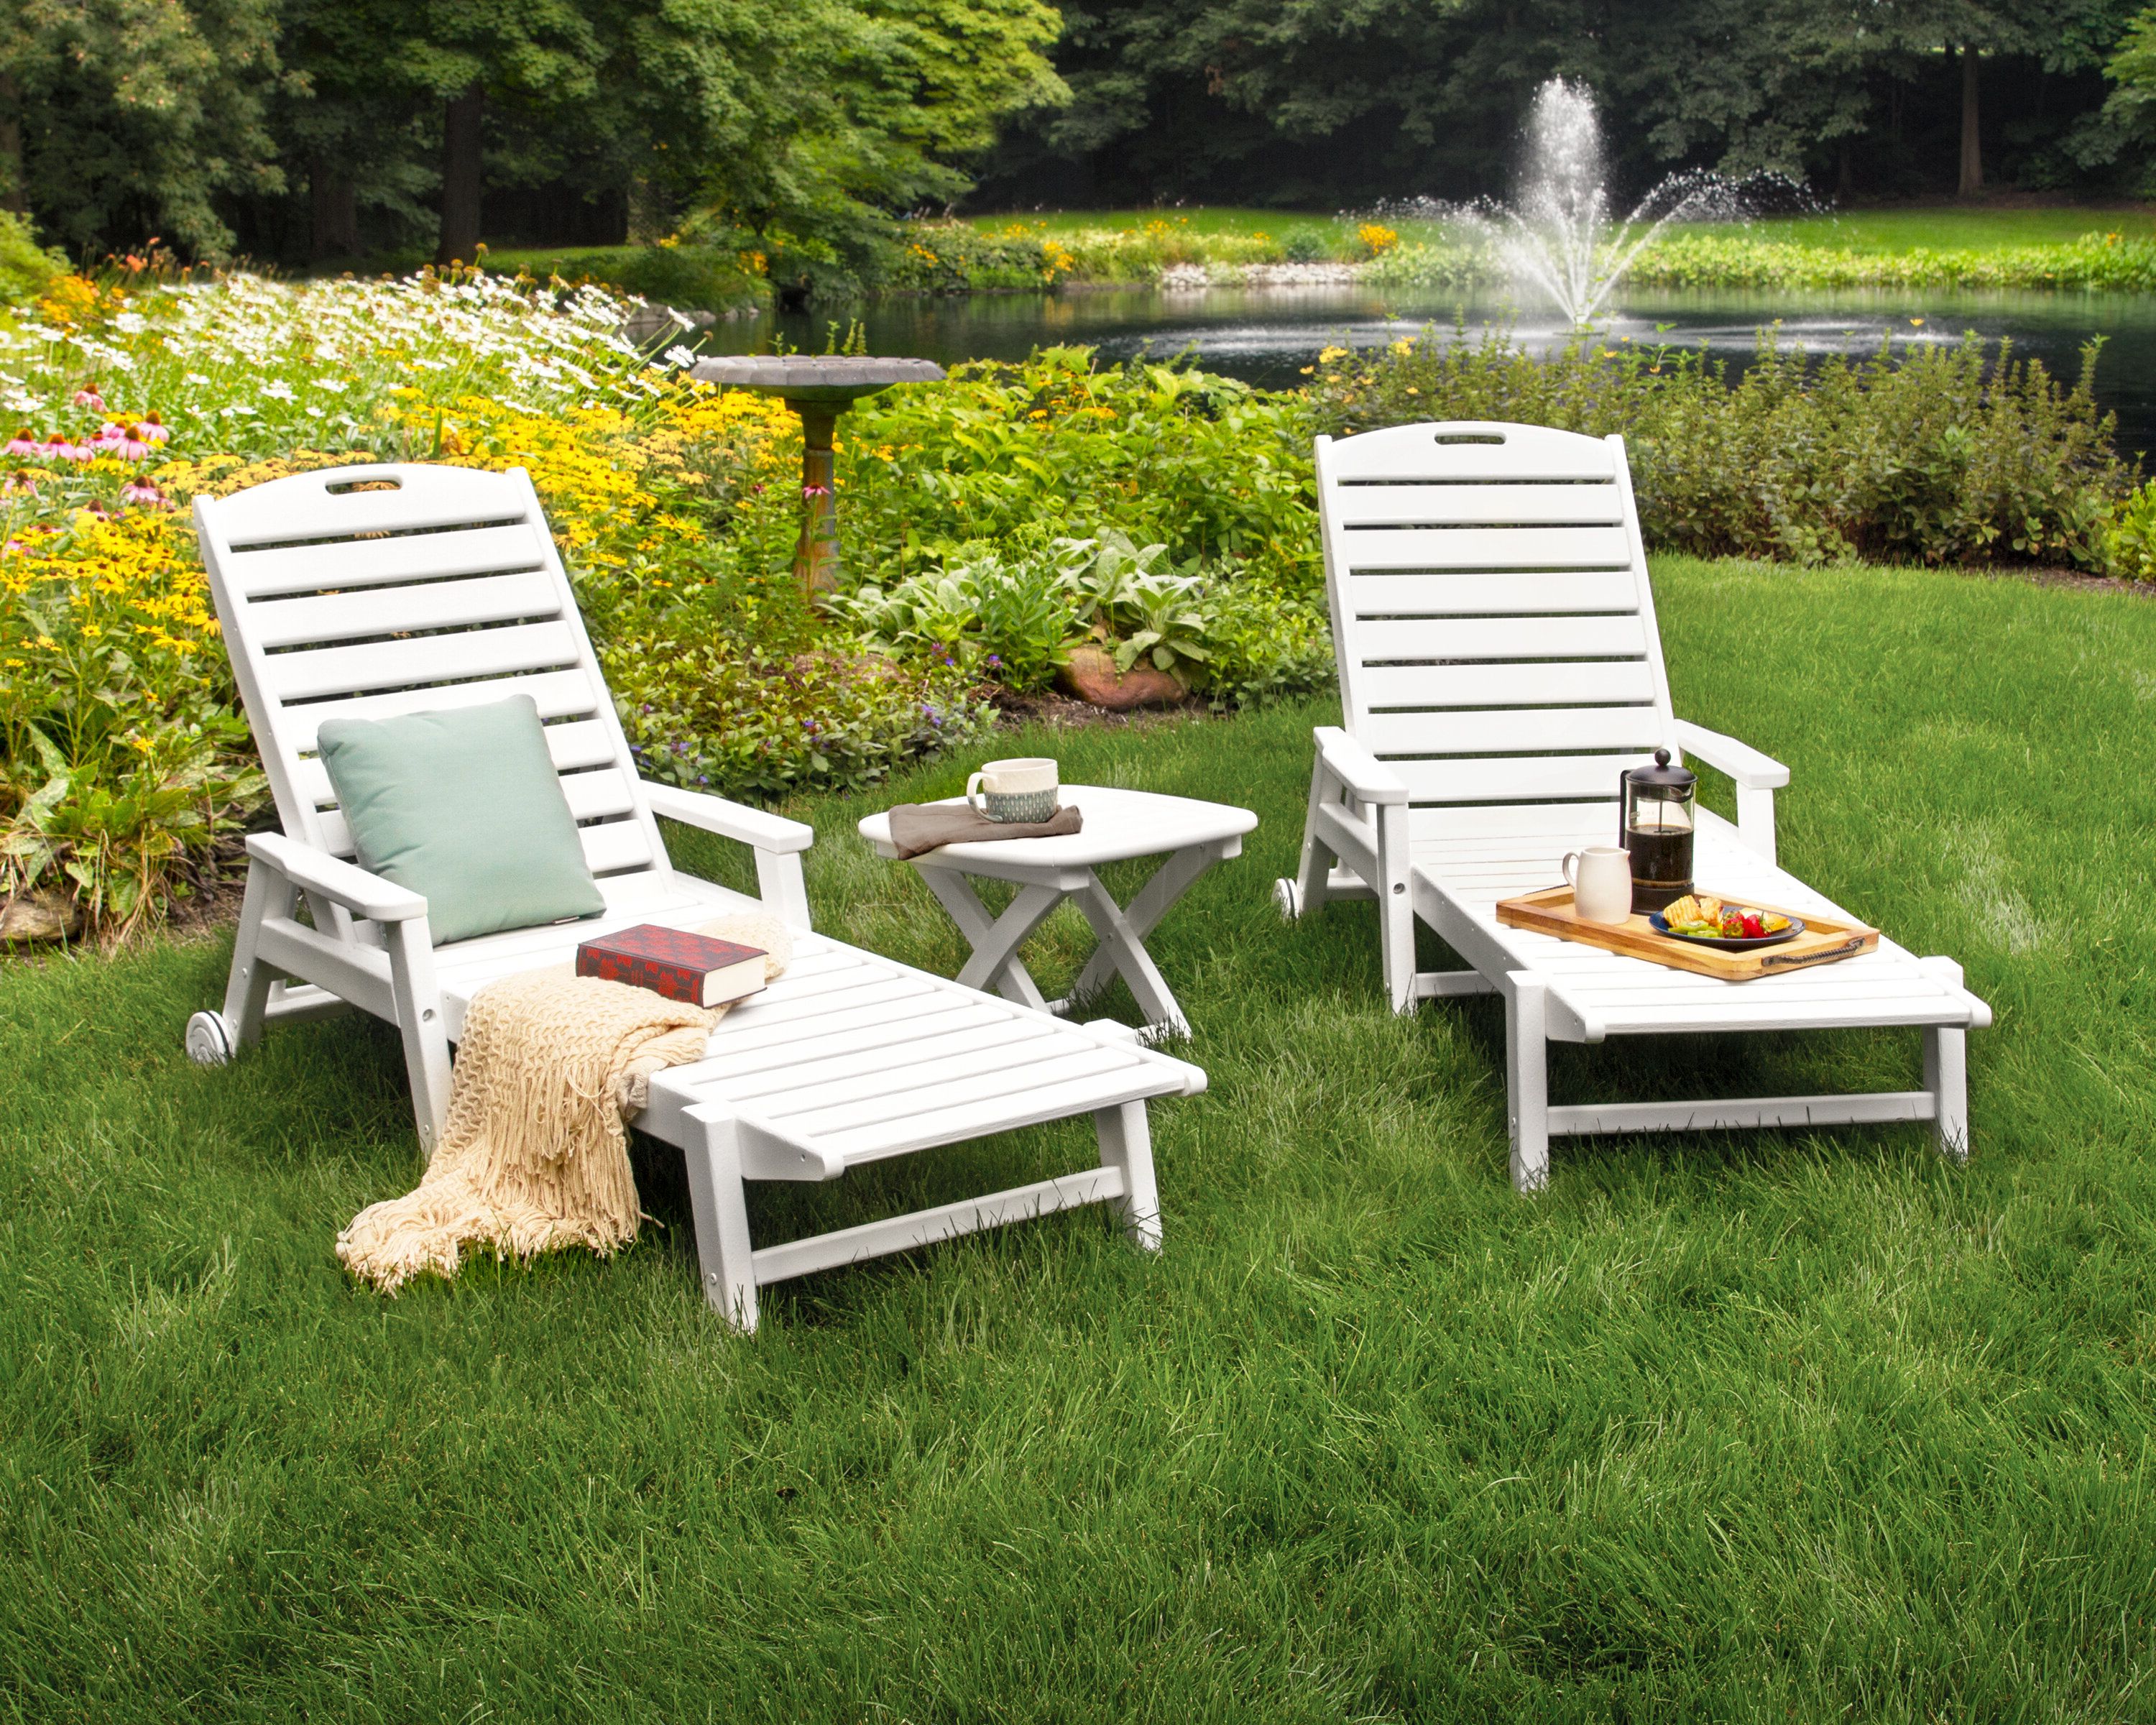 Preferred Nautical 3 Piece Outdoor Chaise Lounge Sets With Wheels And Table Intended For Avid 3 Piece Chaise Lounge Set (Photo 7 of 25)